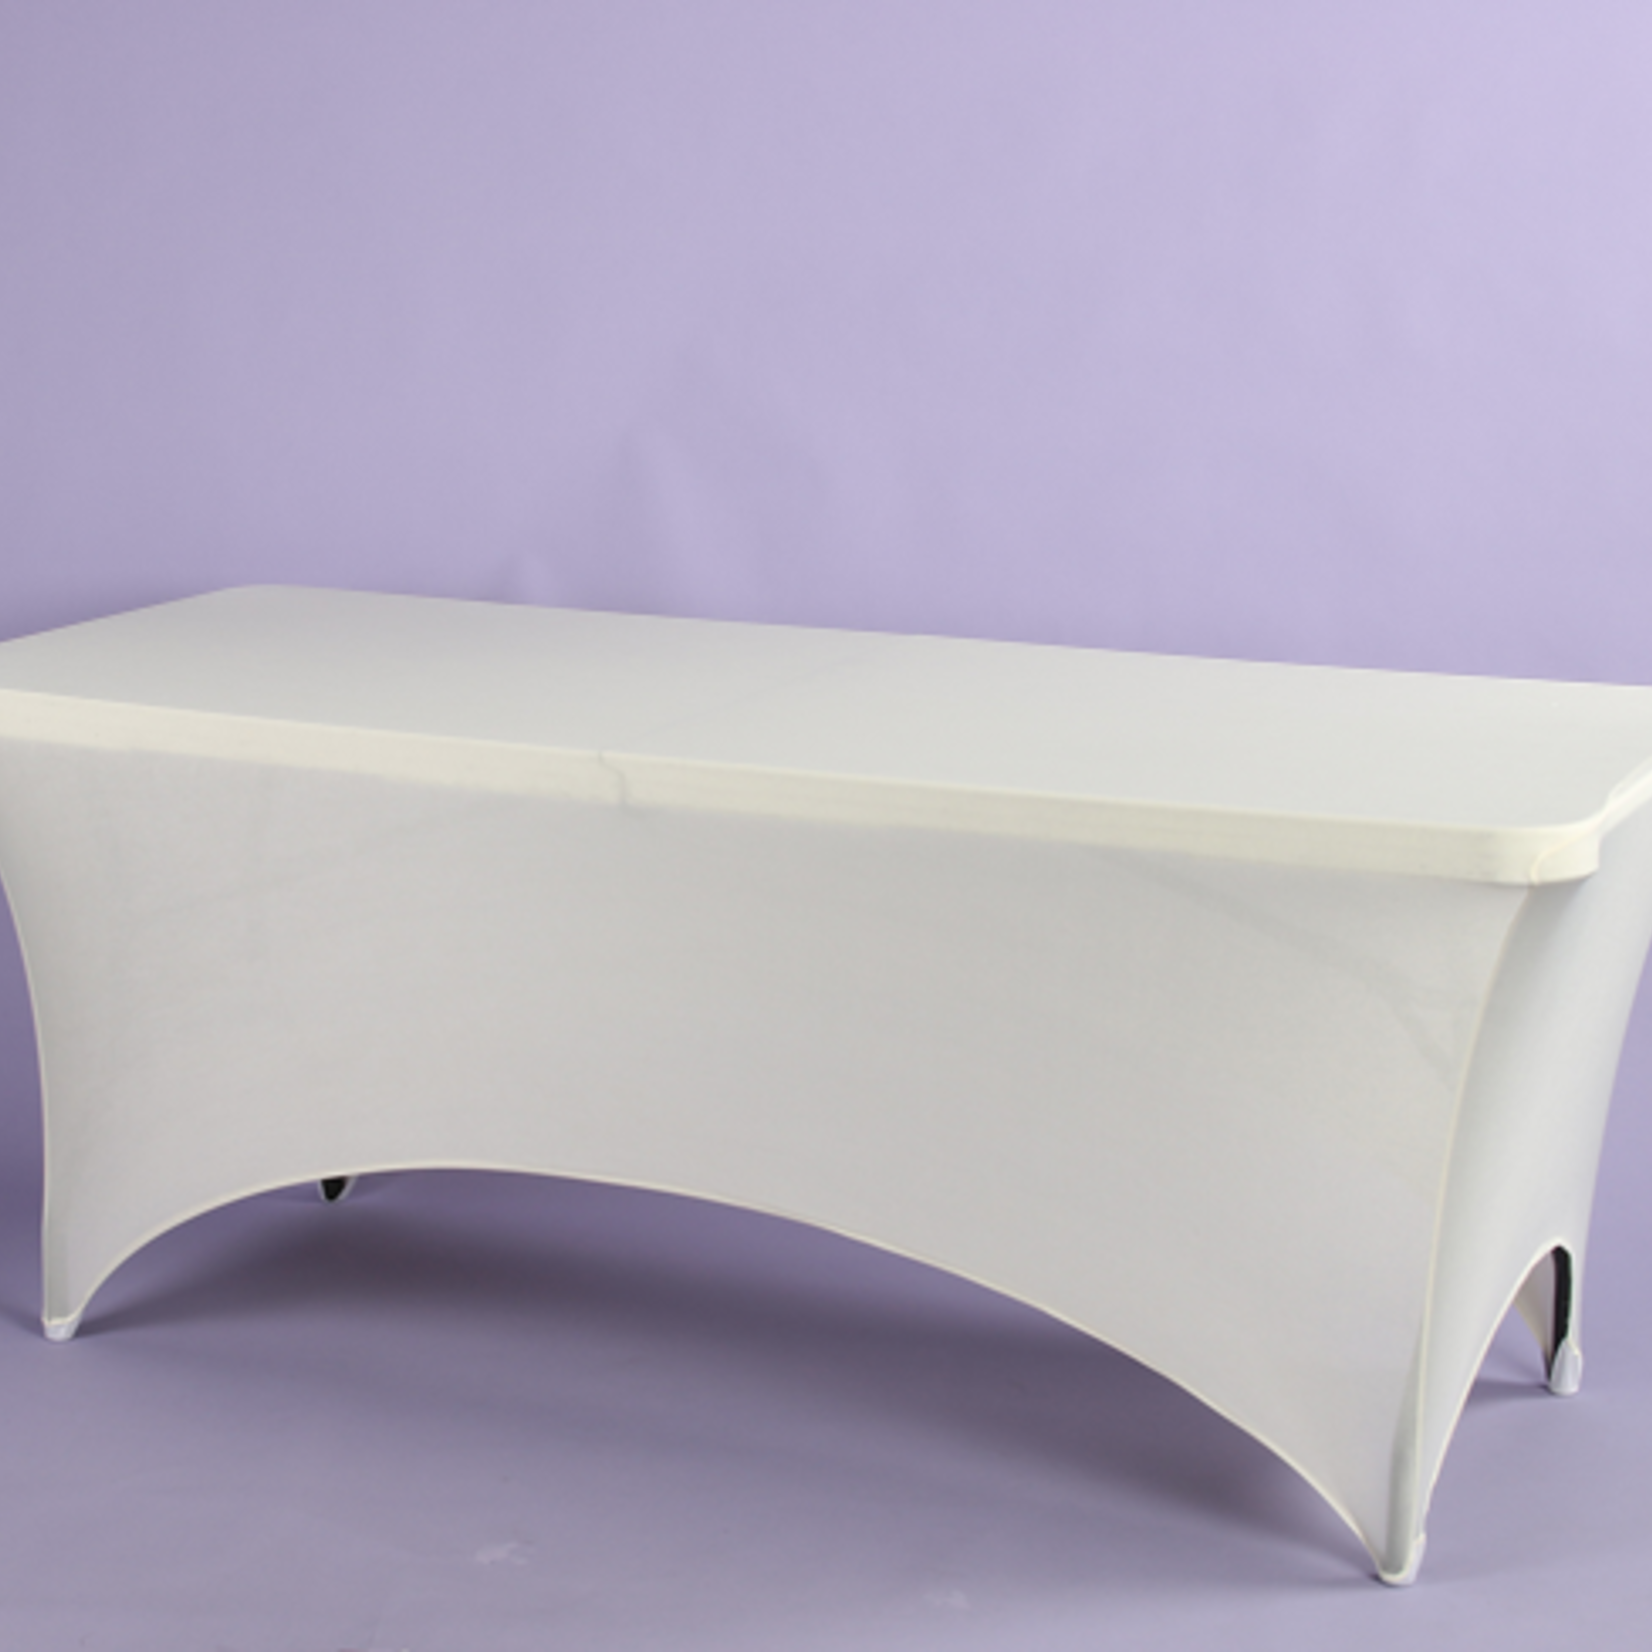 IVORY 8’ SPANDEX REC TABLE COVER 96"L X 30"W X 29"H